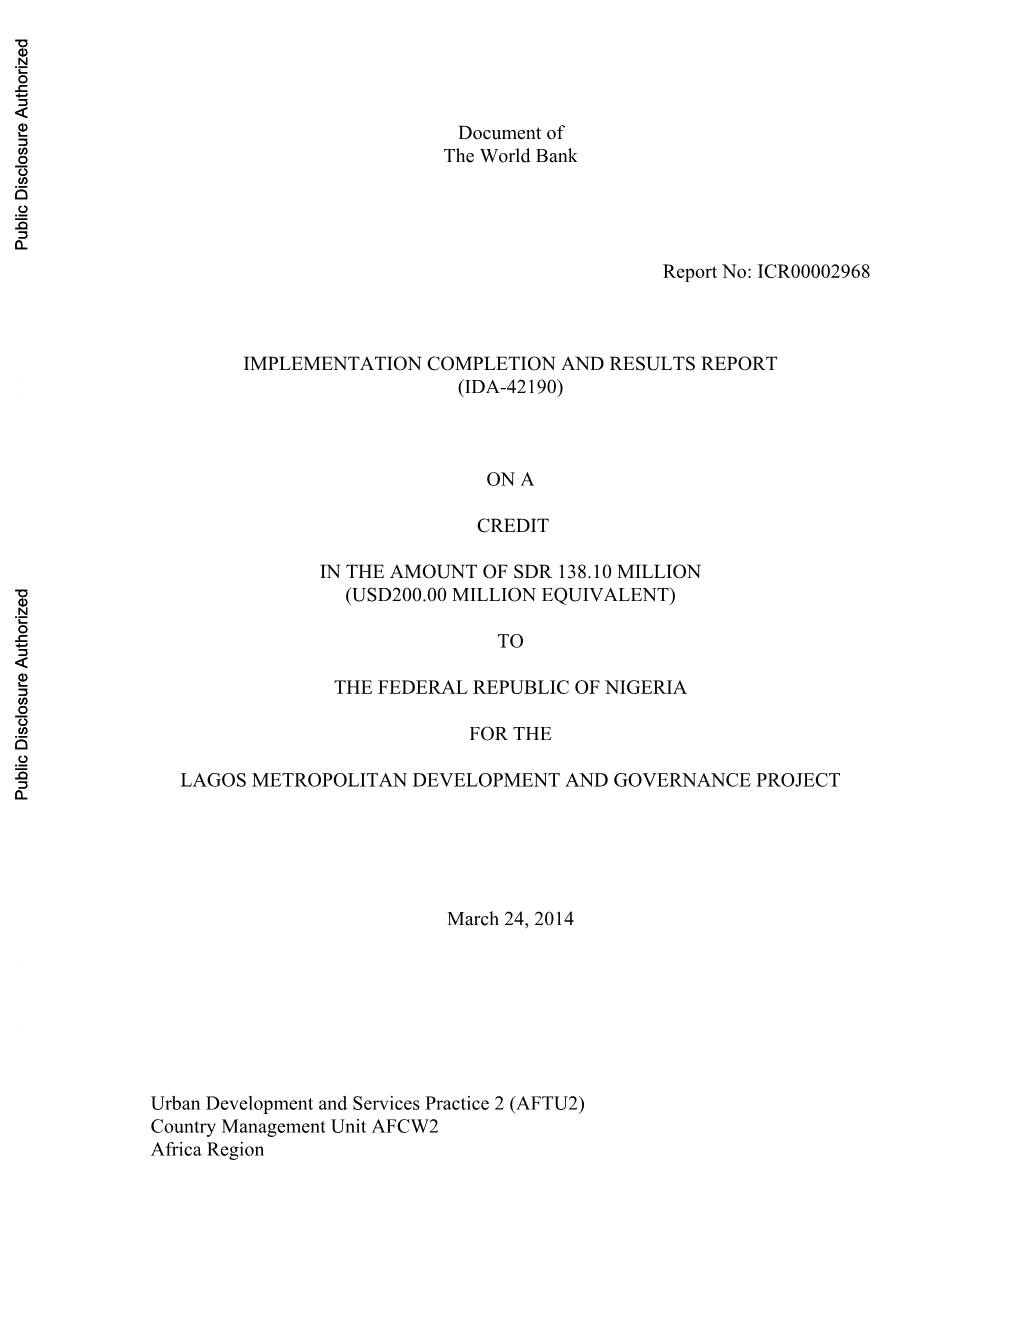 Document of the World Bank